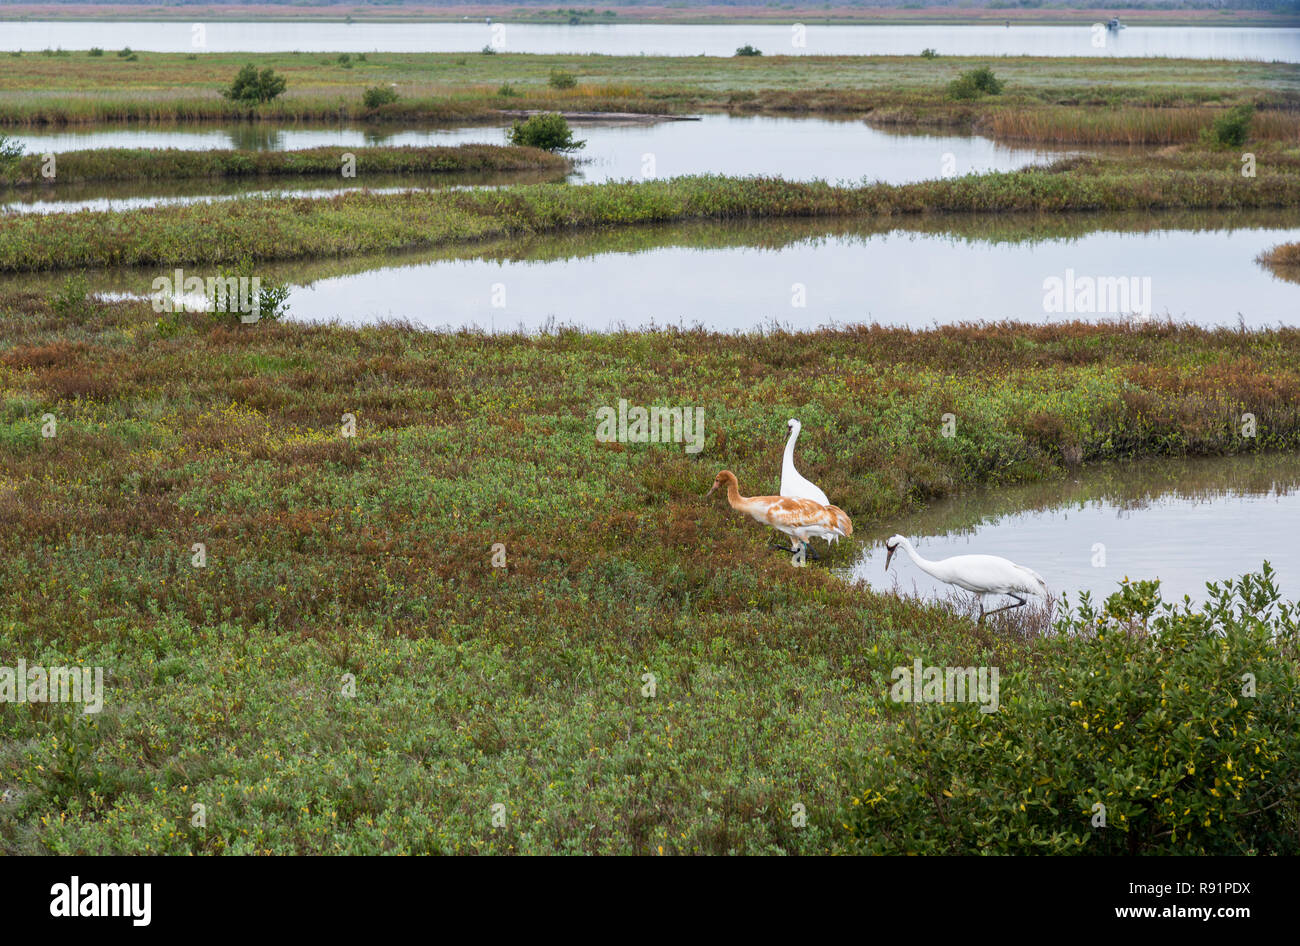 A family of Whooping Cranes (Grus americana) foraging in their winter habitat. Aransas National Wildlife Refuge, Texas, USA. Stock Photo